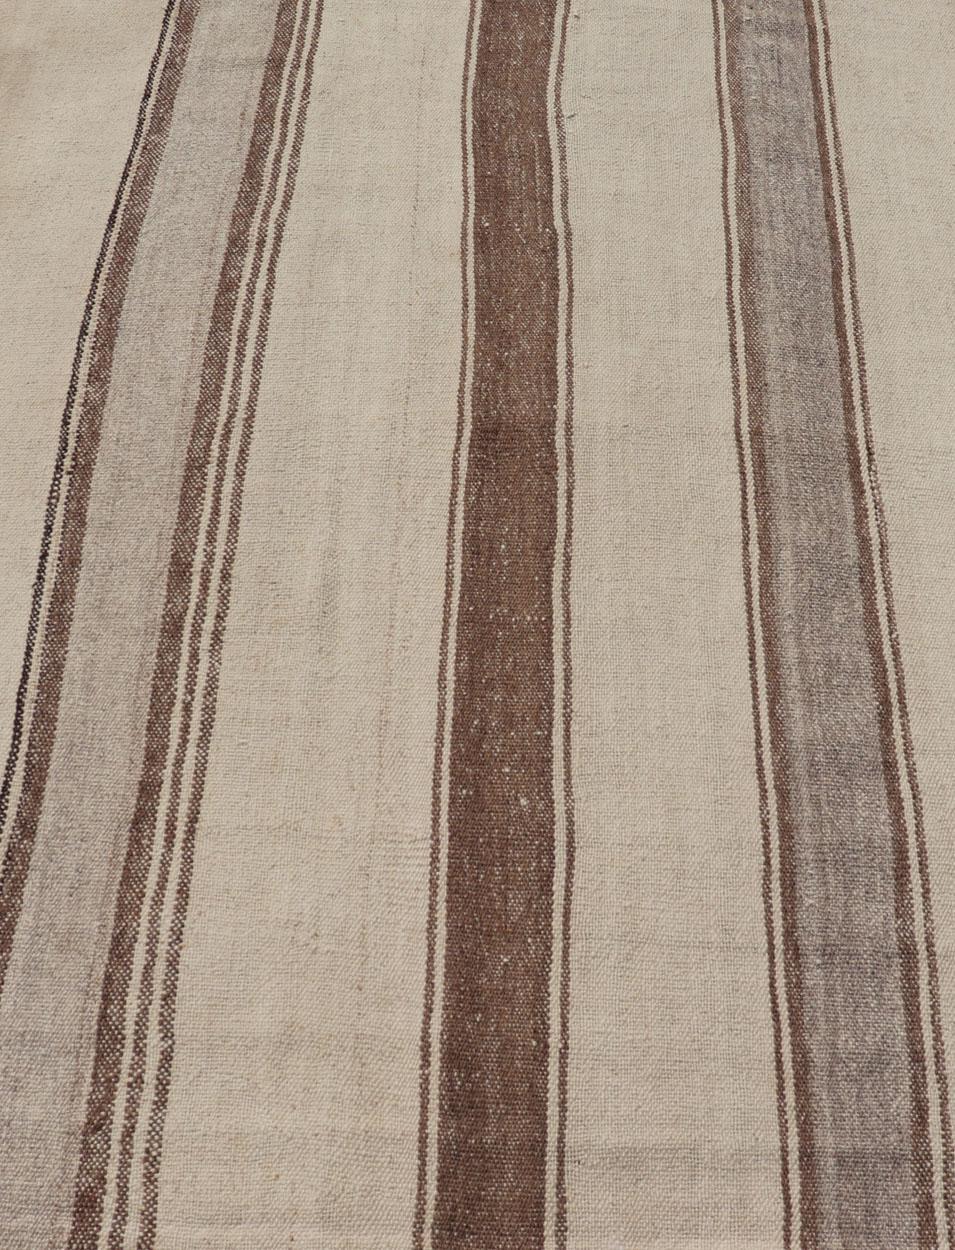 Hand-Woven Vintage Turkish Kilim with Vertical Stripes in Tan, Taupe, Grey, Cream and Brown For Sale